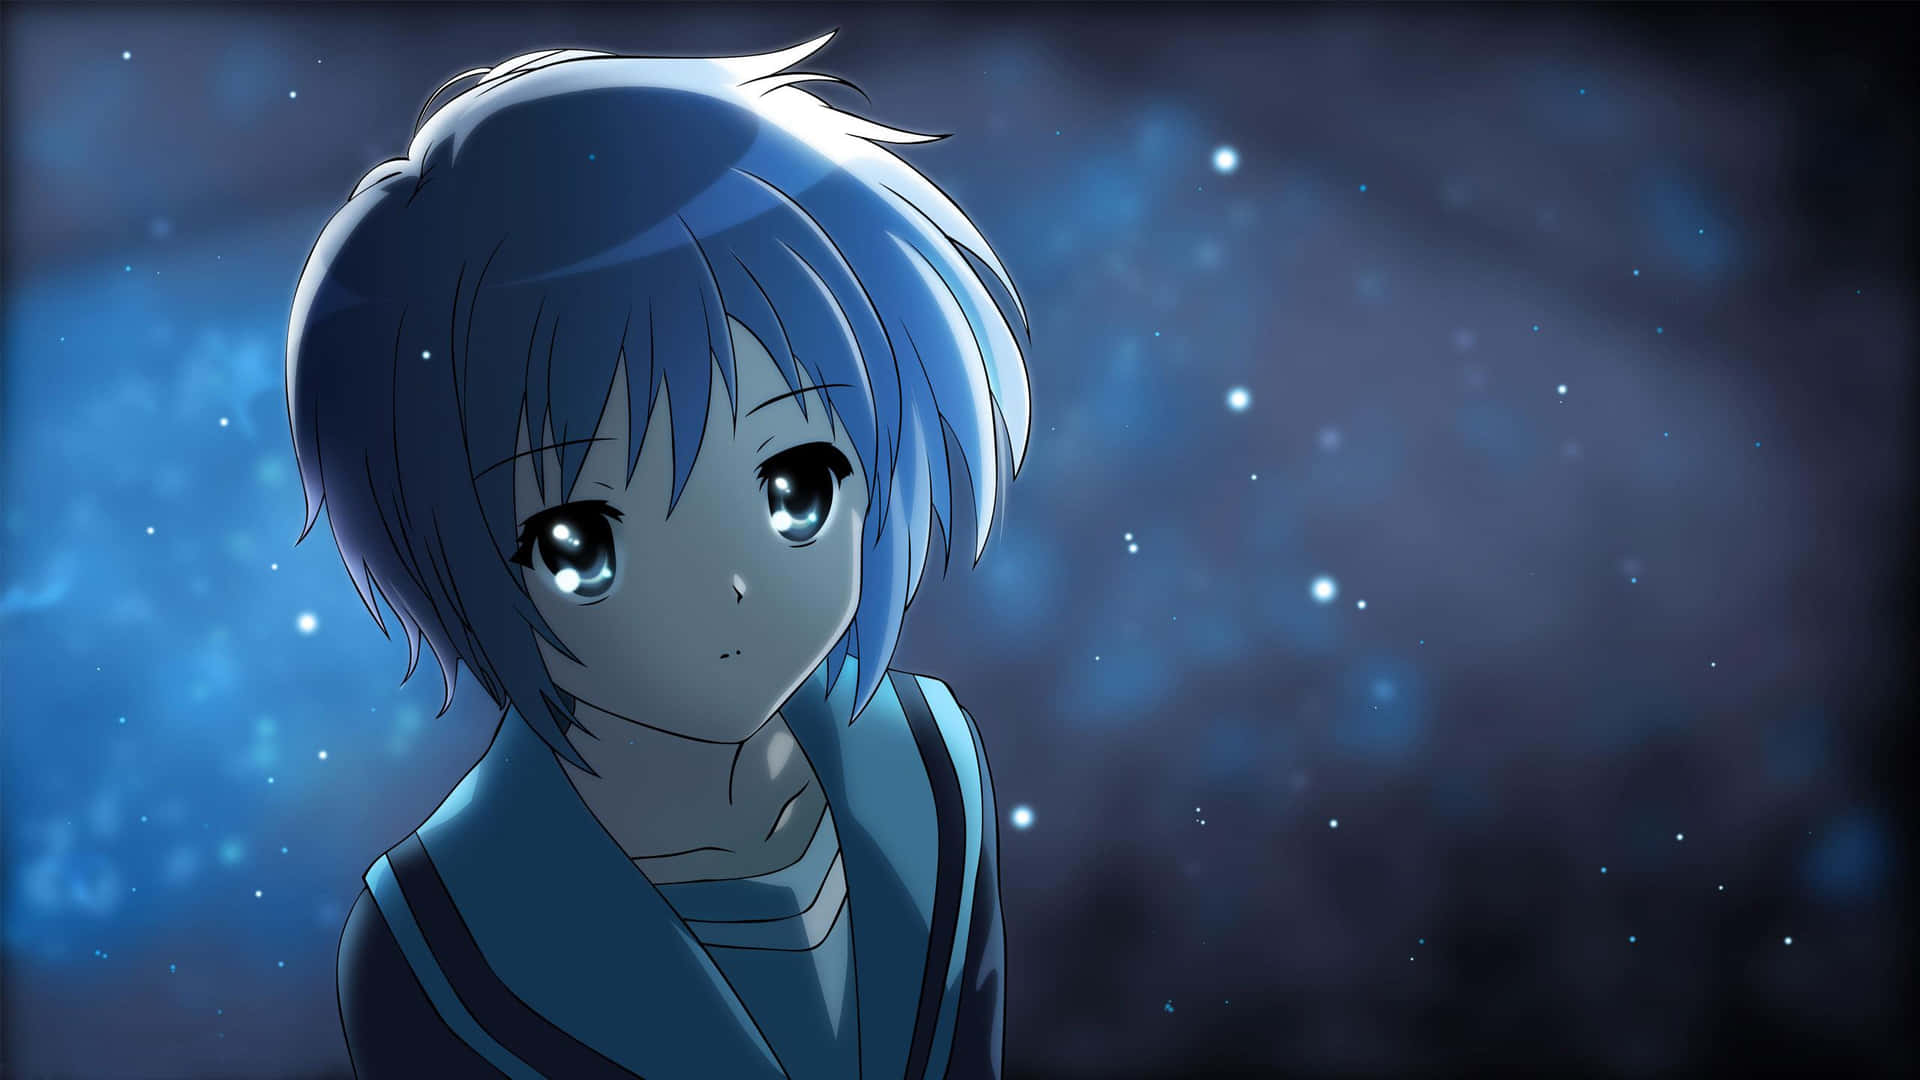 Haruhi Suzumiya standing confidently against a vibrant background Wallpaper